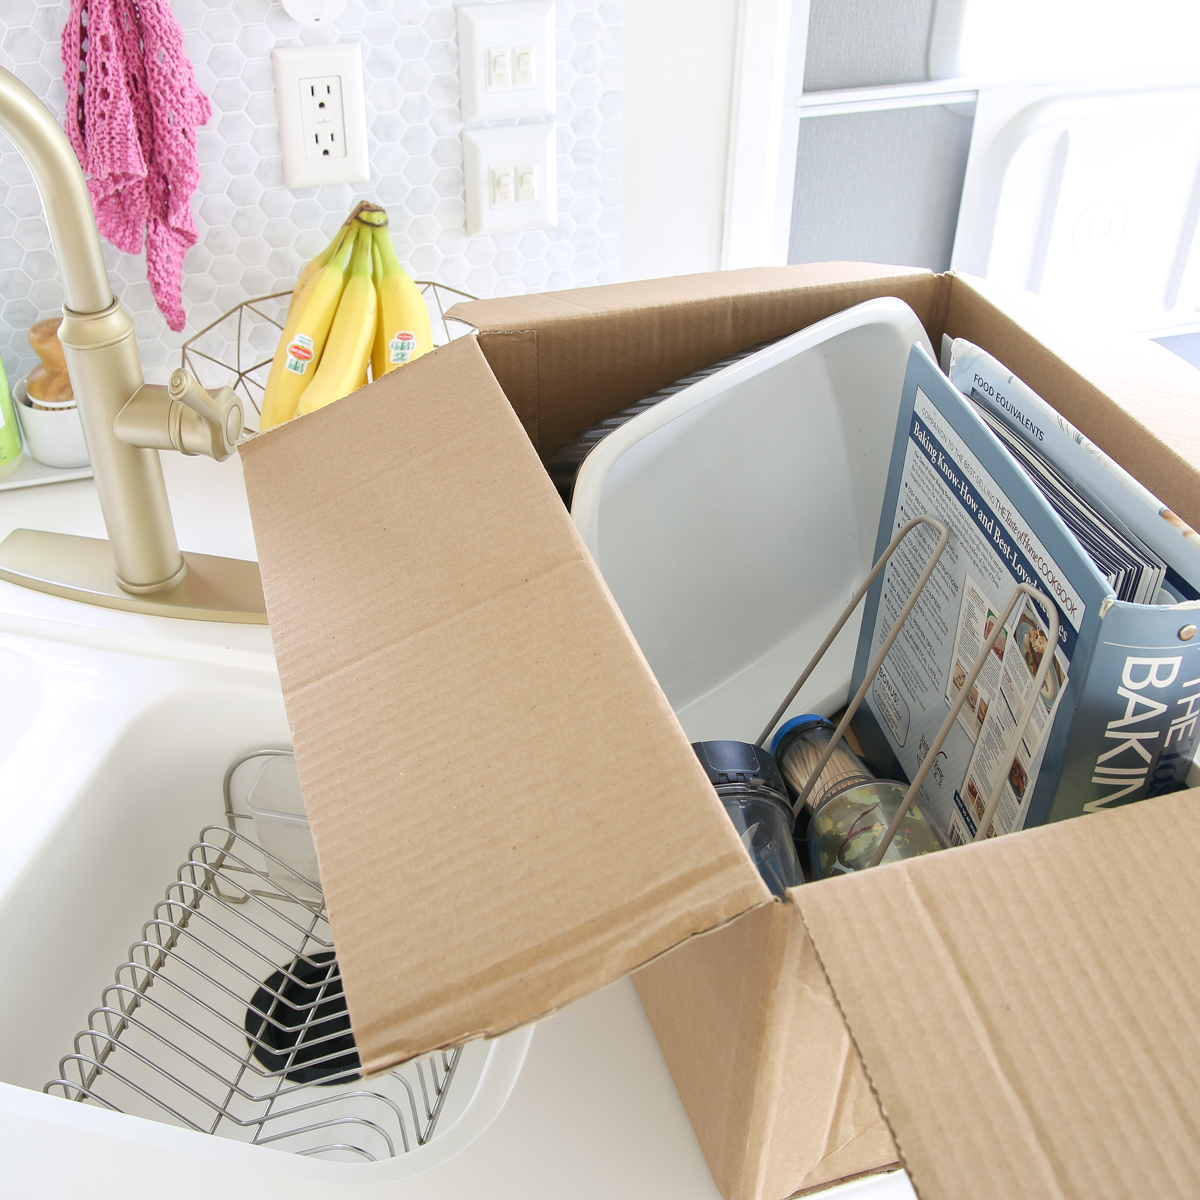 The Root Cause of Clutter (and How to Stop it Now)